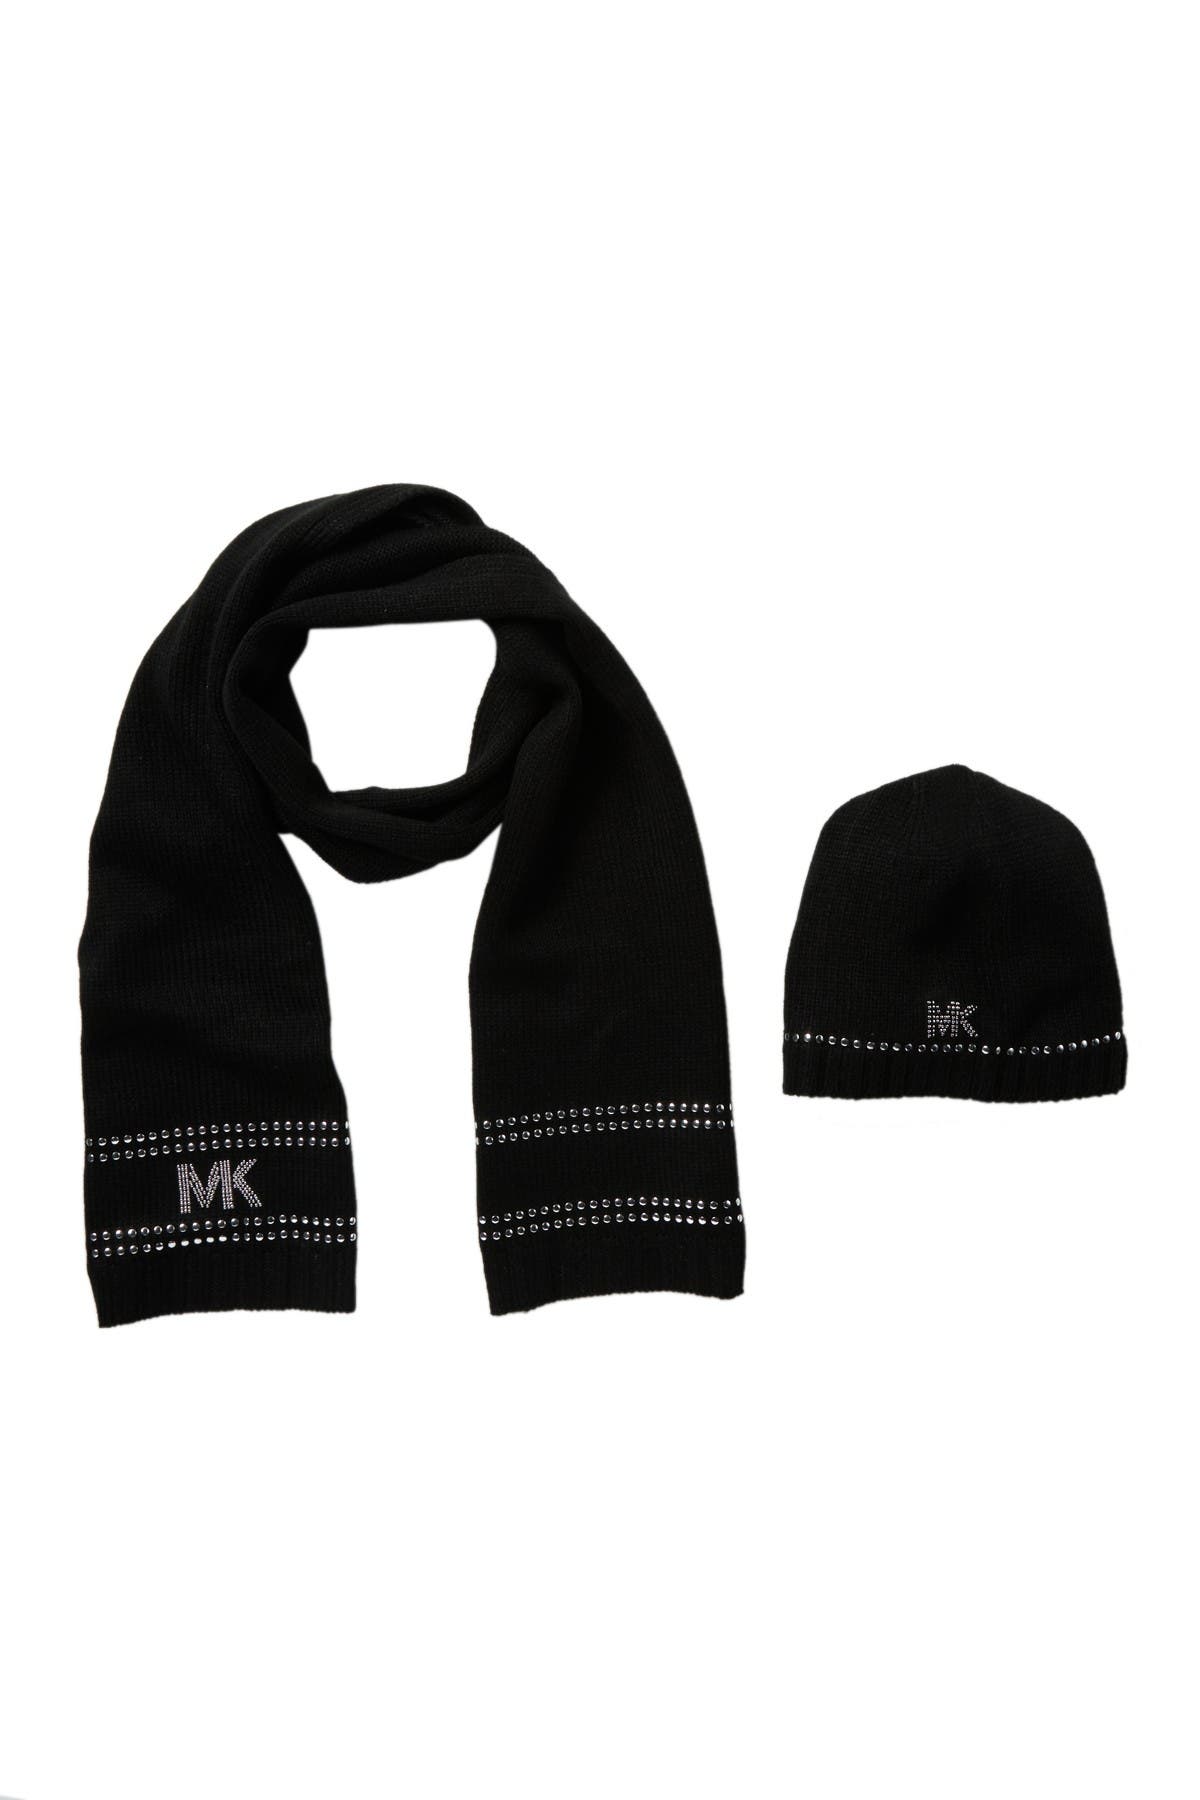 michael kors hat and scarf sets